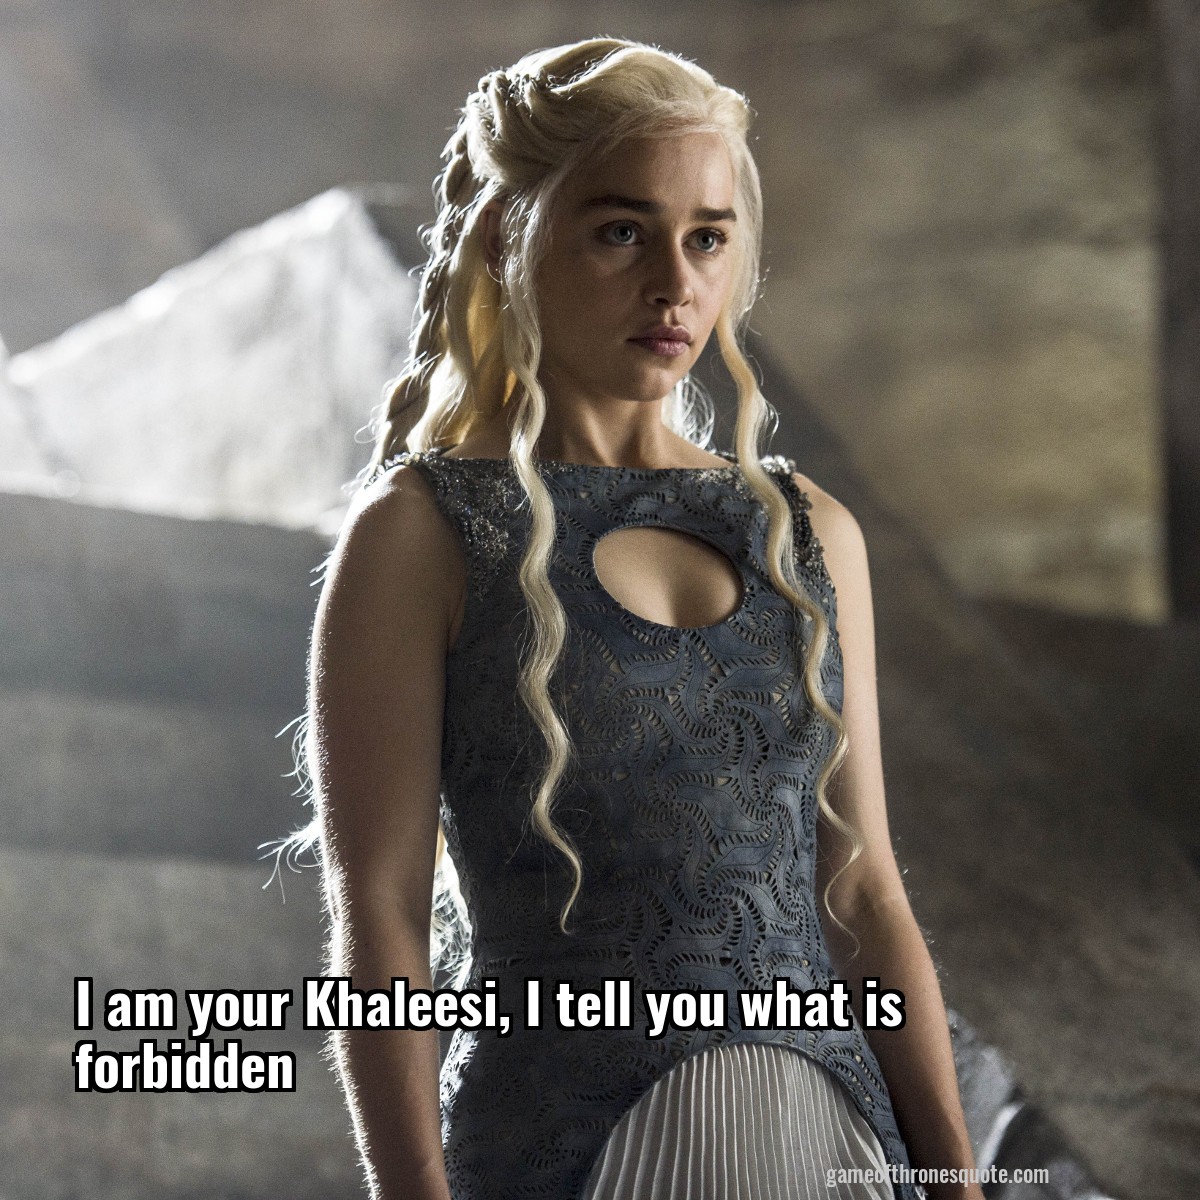 I am your Khaleesi, I tell you what is forbidden